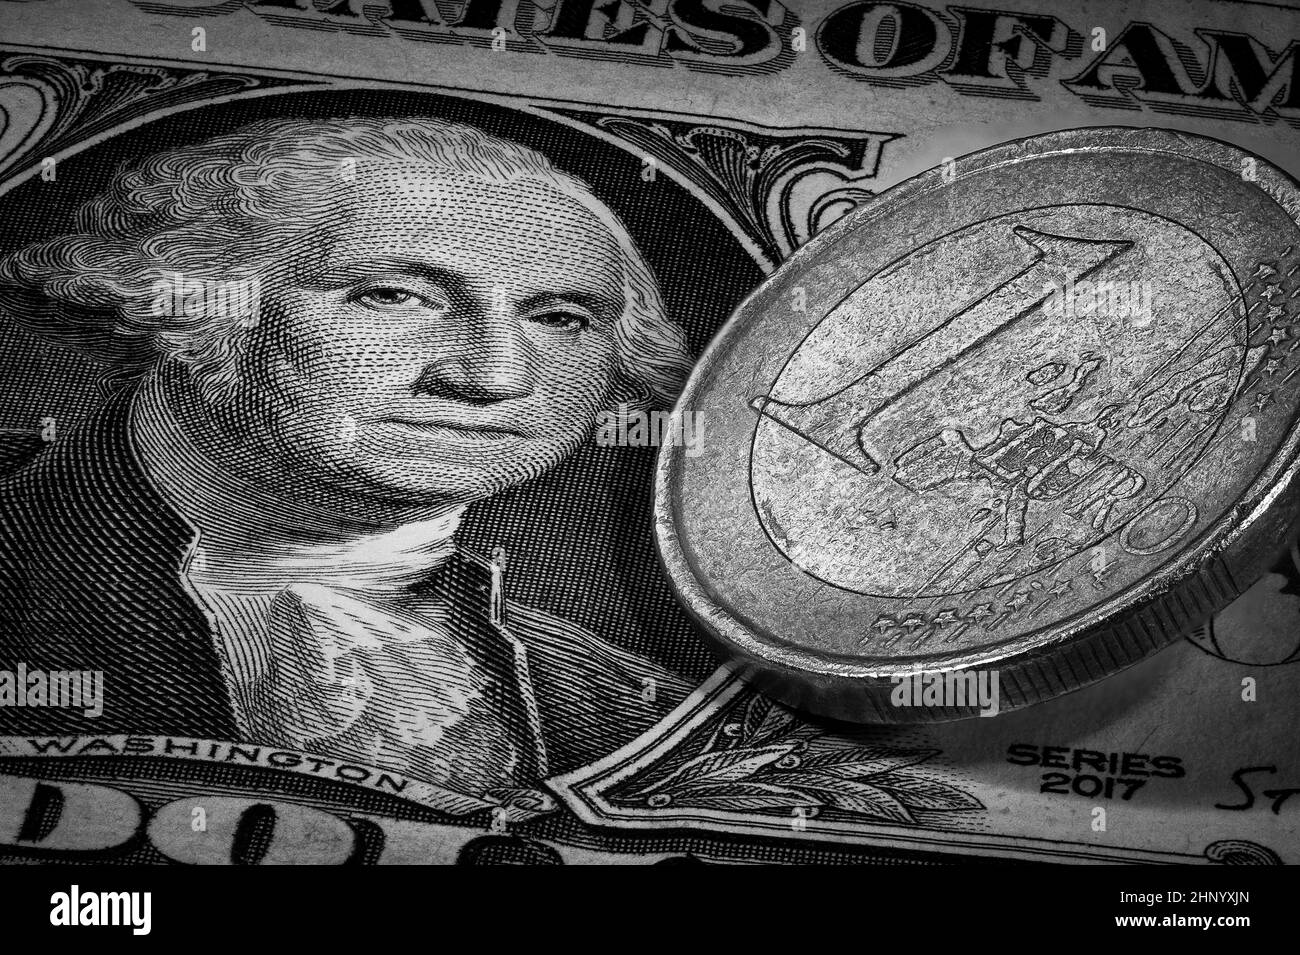 Euro Dollar Exchange Rate Parity Close Up Black and White Stock Photo